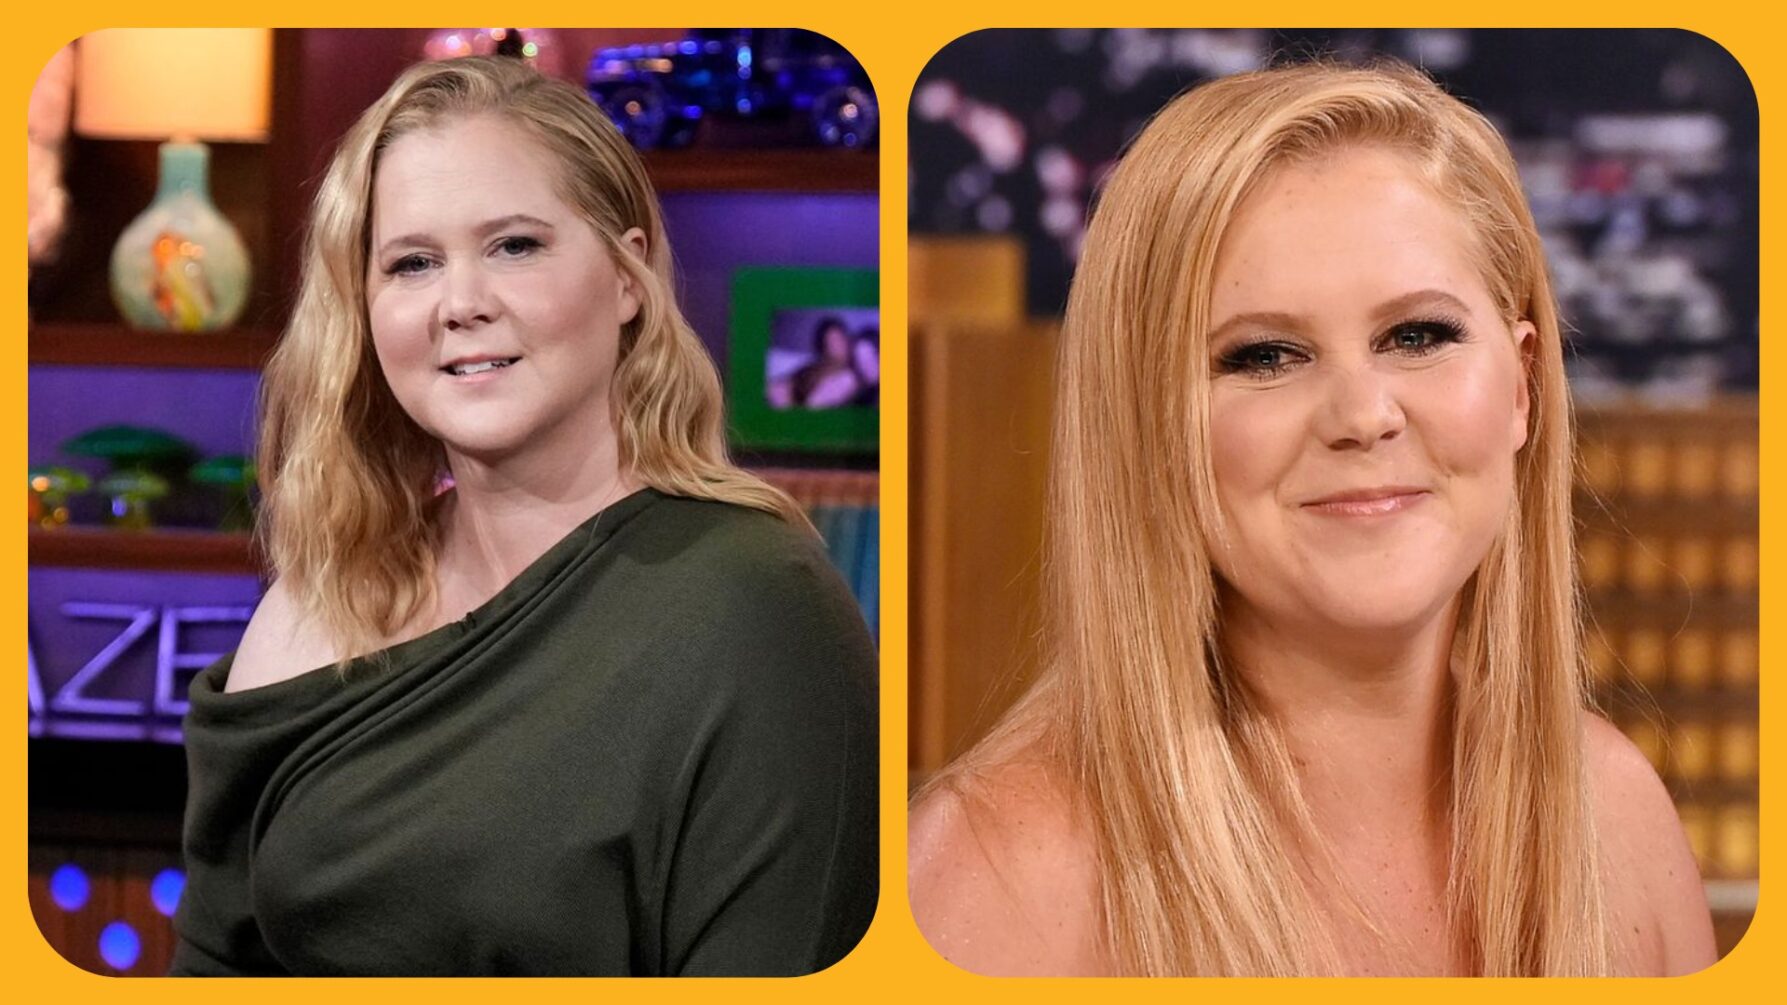 Amy Schumer Says Online Speculation on Her ‘Puffy’ Face Pushed Her To Get Diagnosed